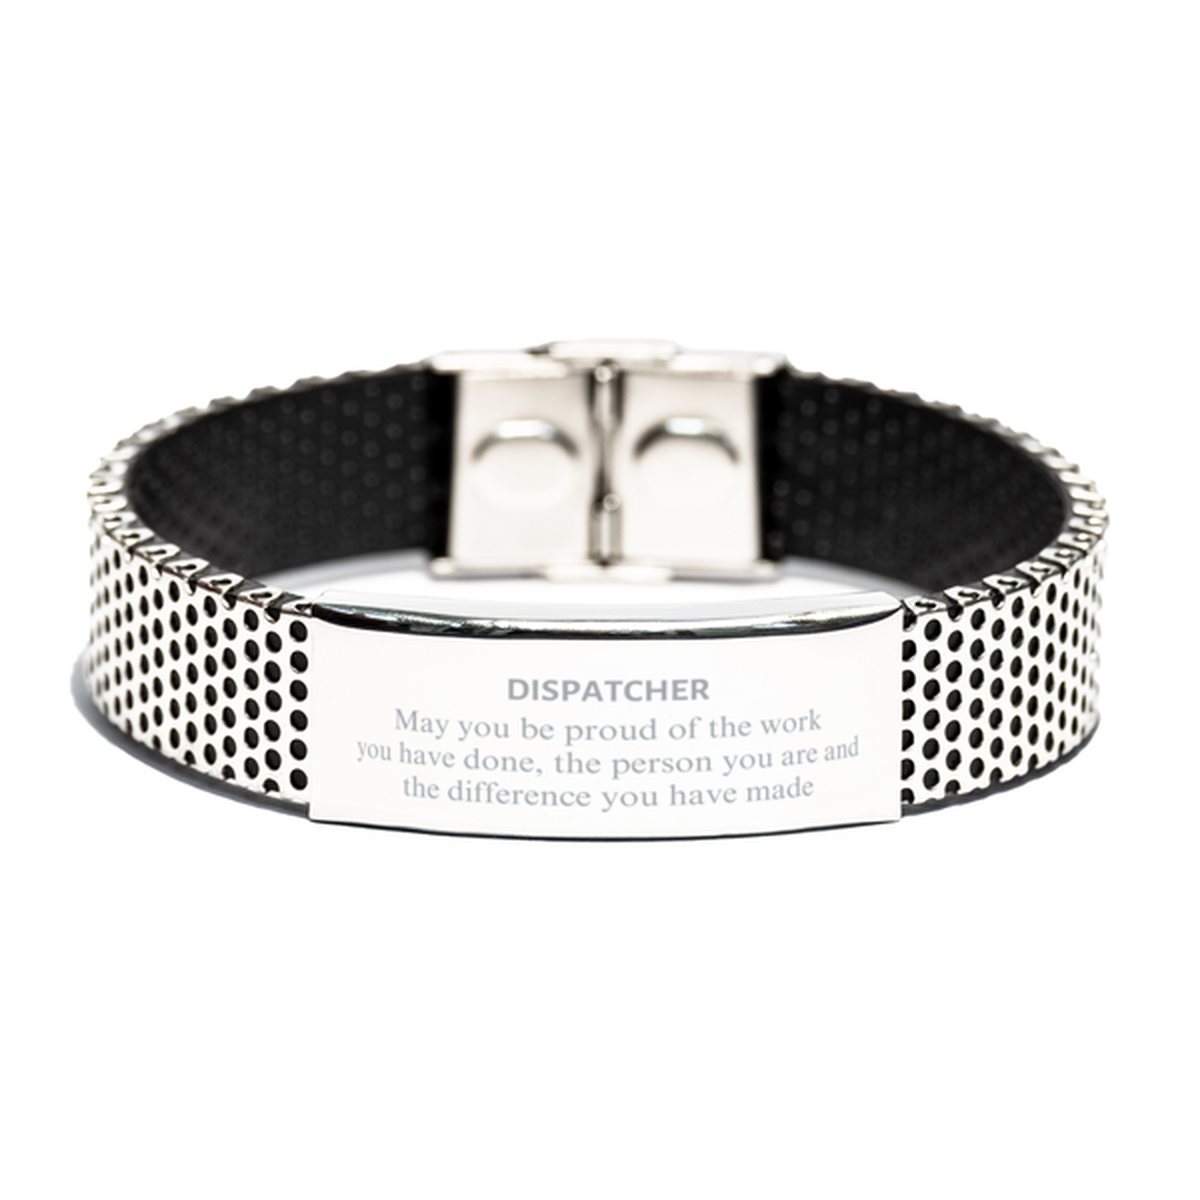 Dispatcher May you be proud of the work you have done, Retirement Dispatcher Stainless Steel Bracelet for Colleague Appreciation Gifts Amazing for Dispatcher